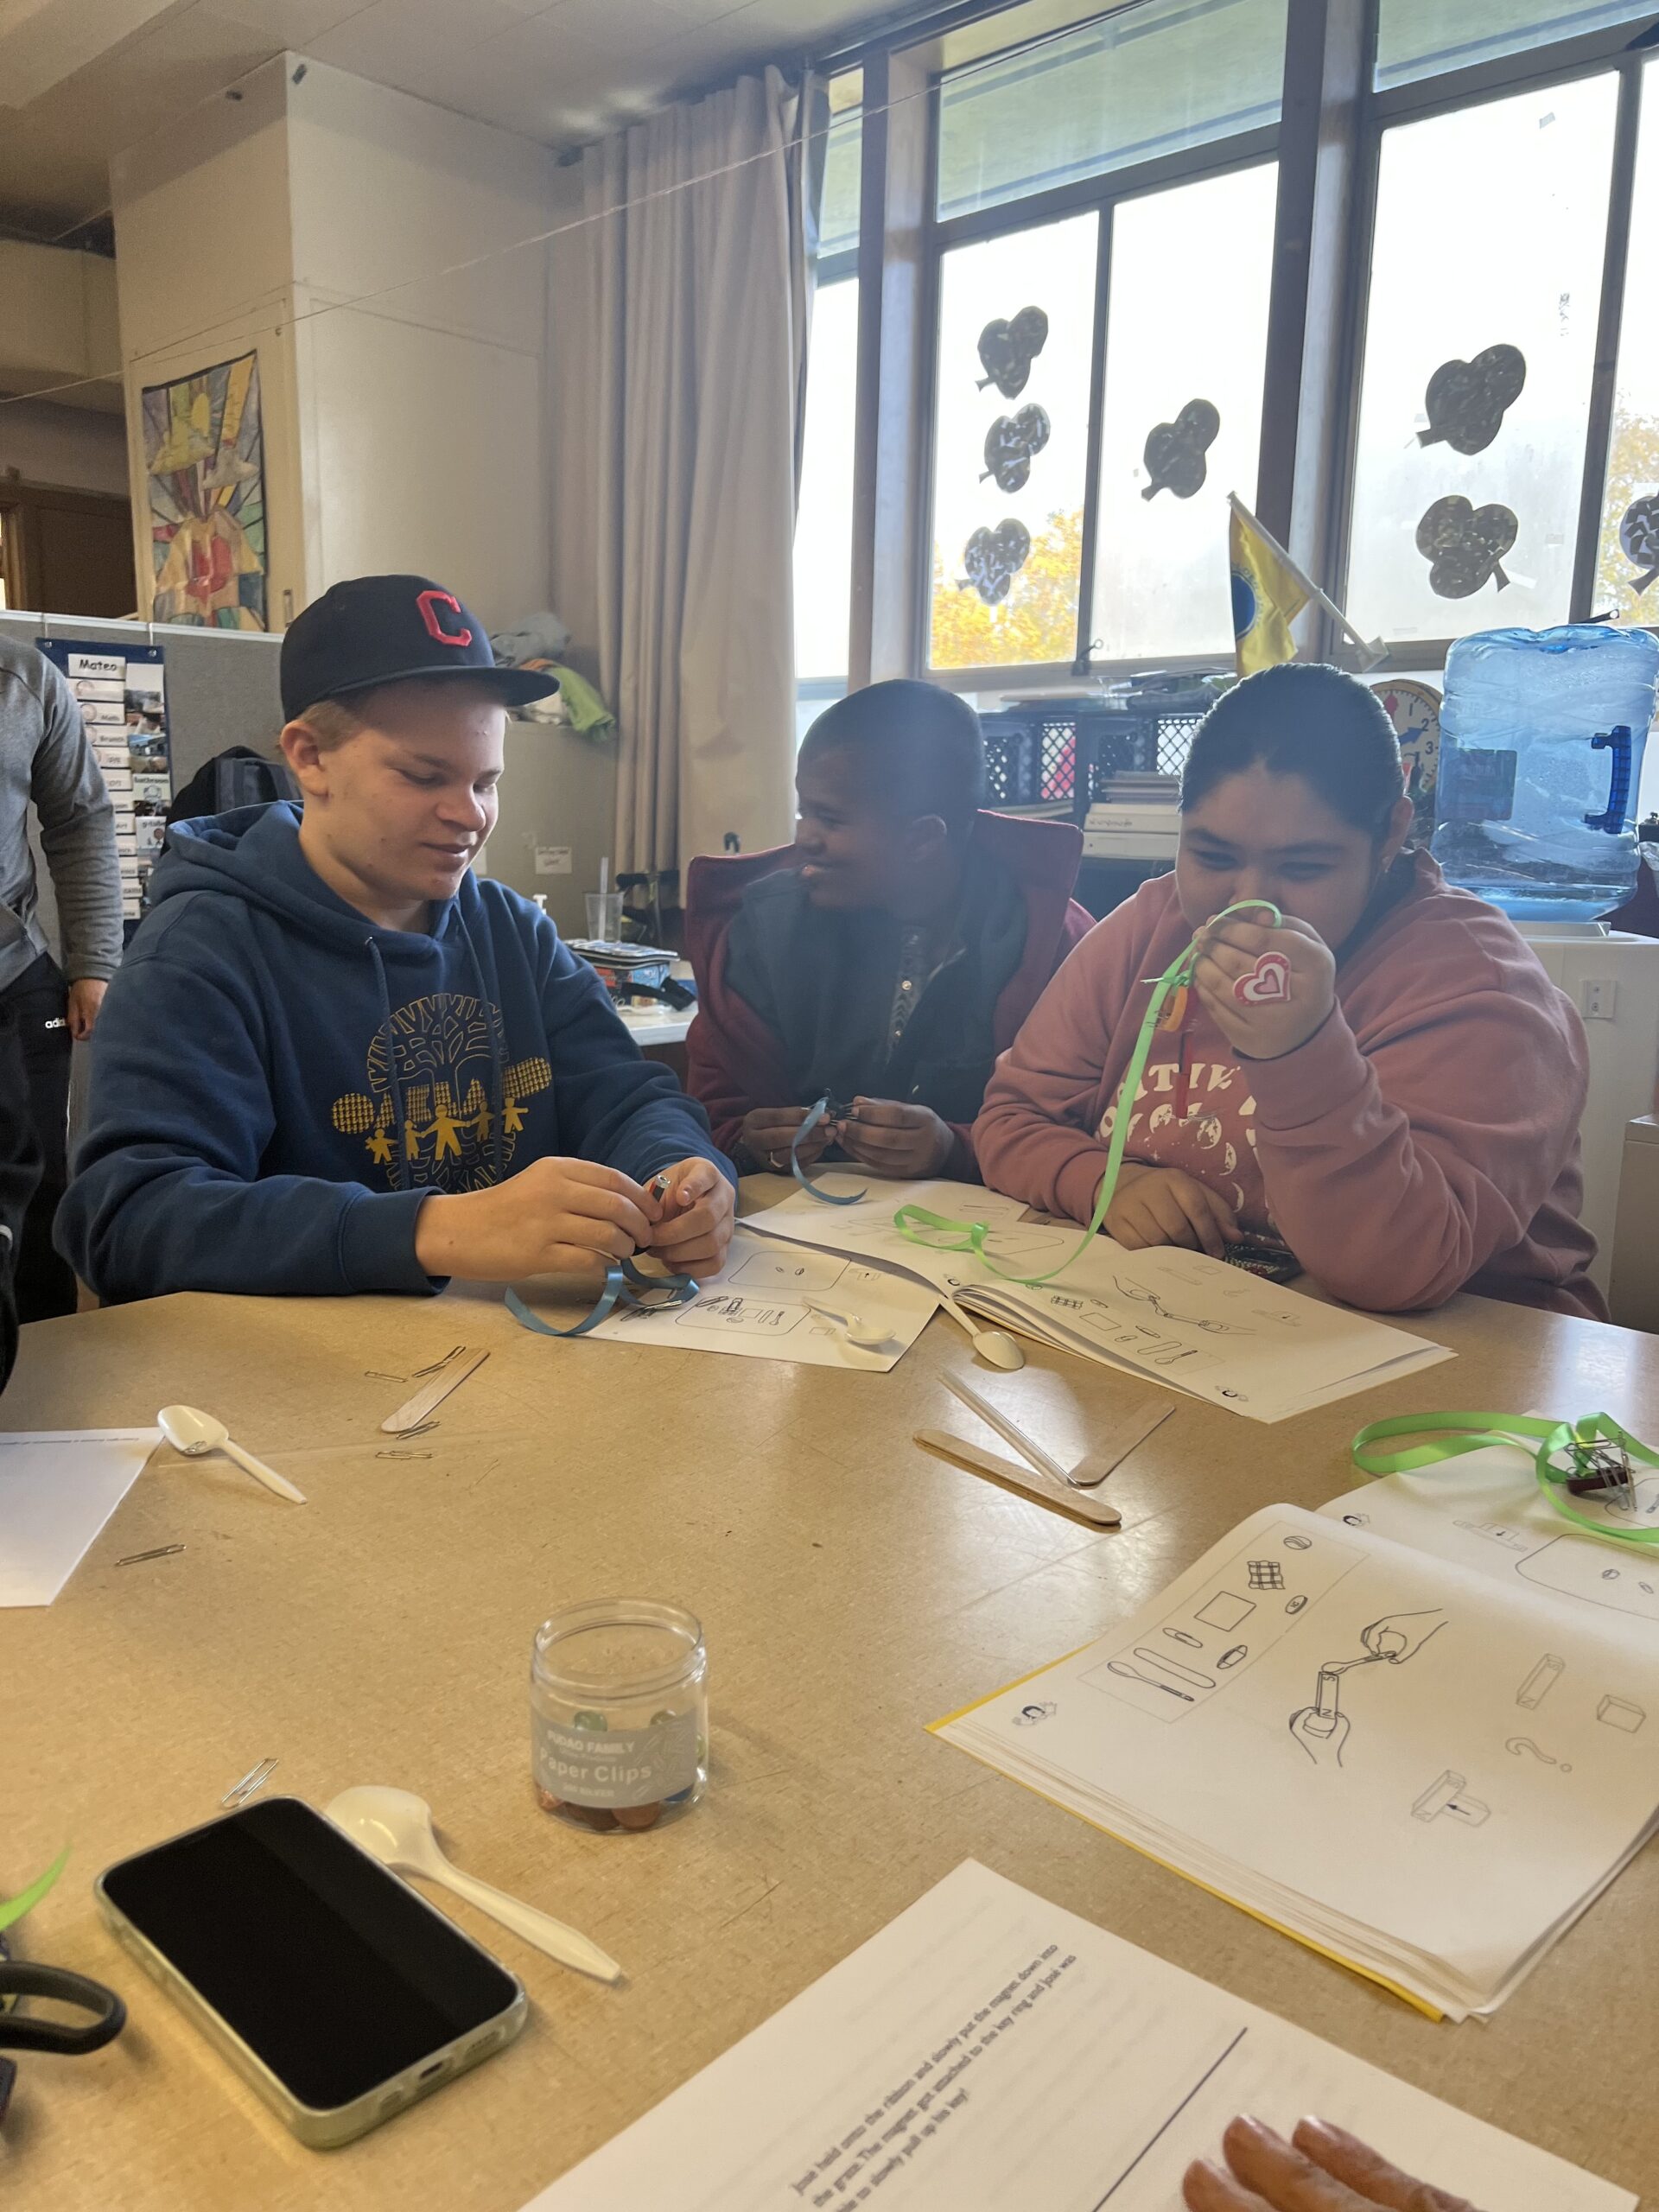 Three high school students sit at a wide tan table in a brightly-lit classroom, smiling while they work together on a hands-on science experiment involving magnets, paper clips, and brightly colored ribbons.